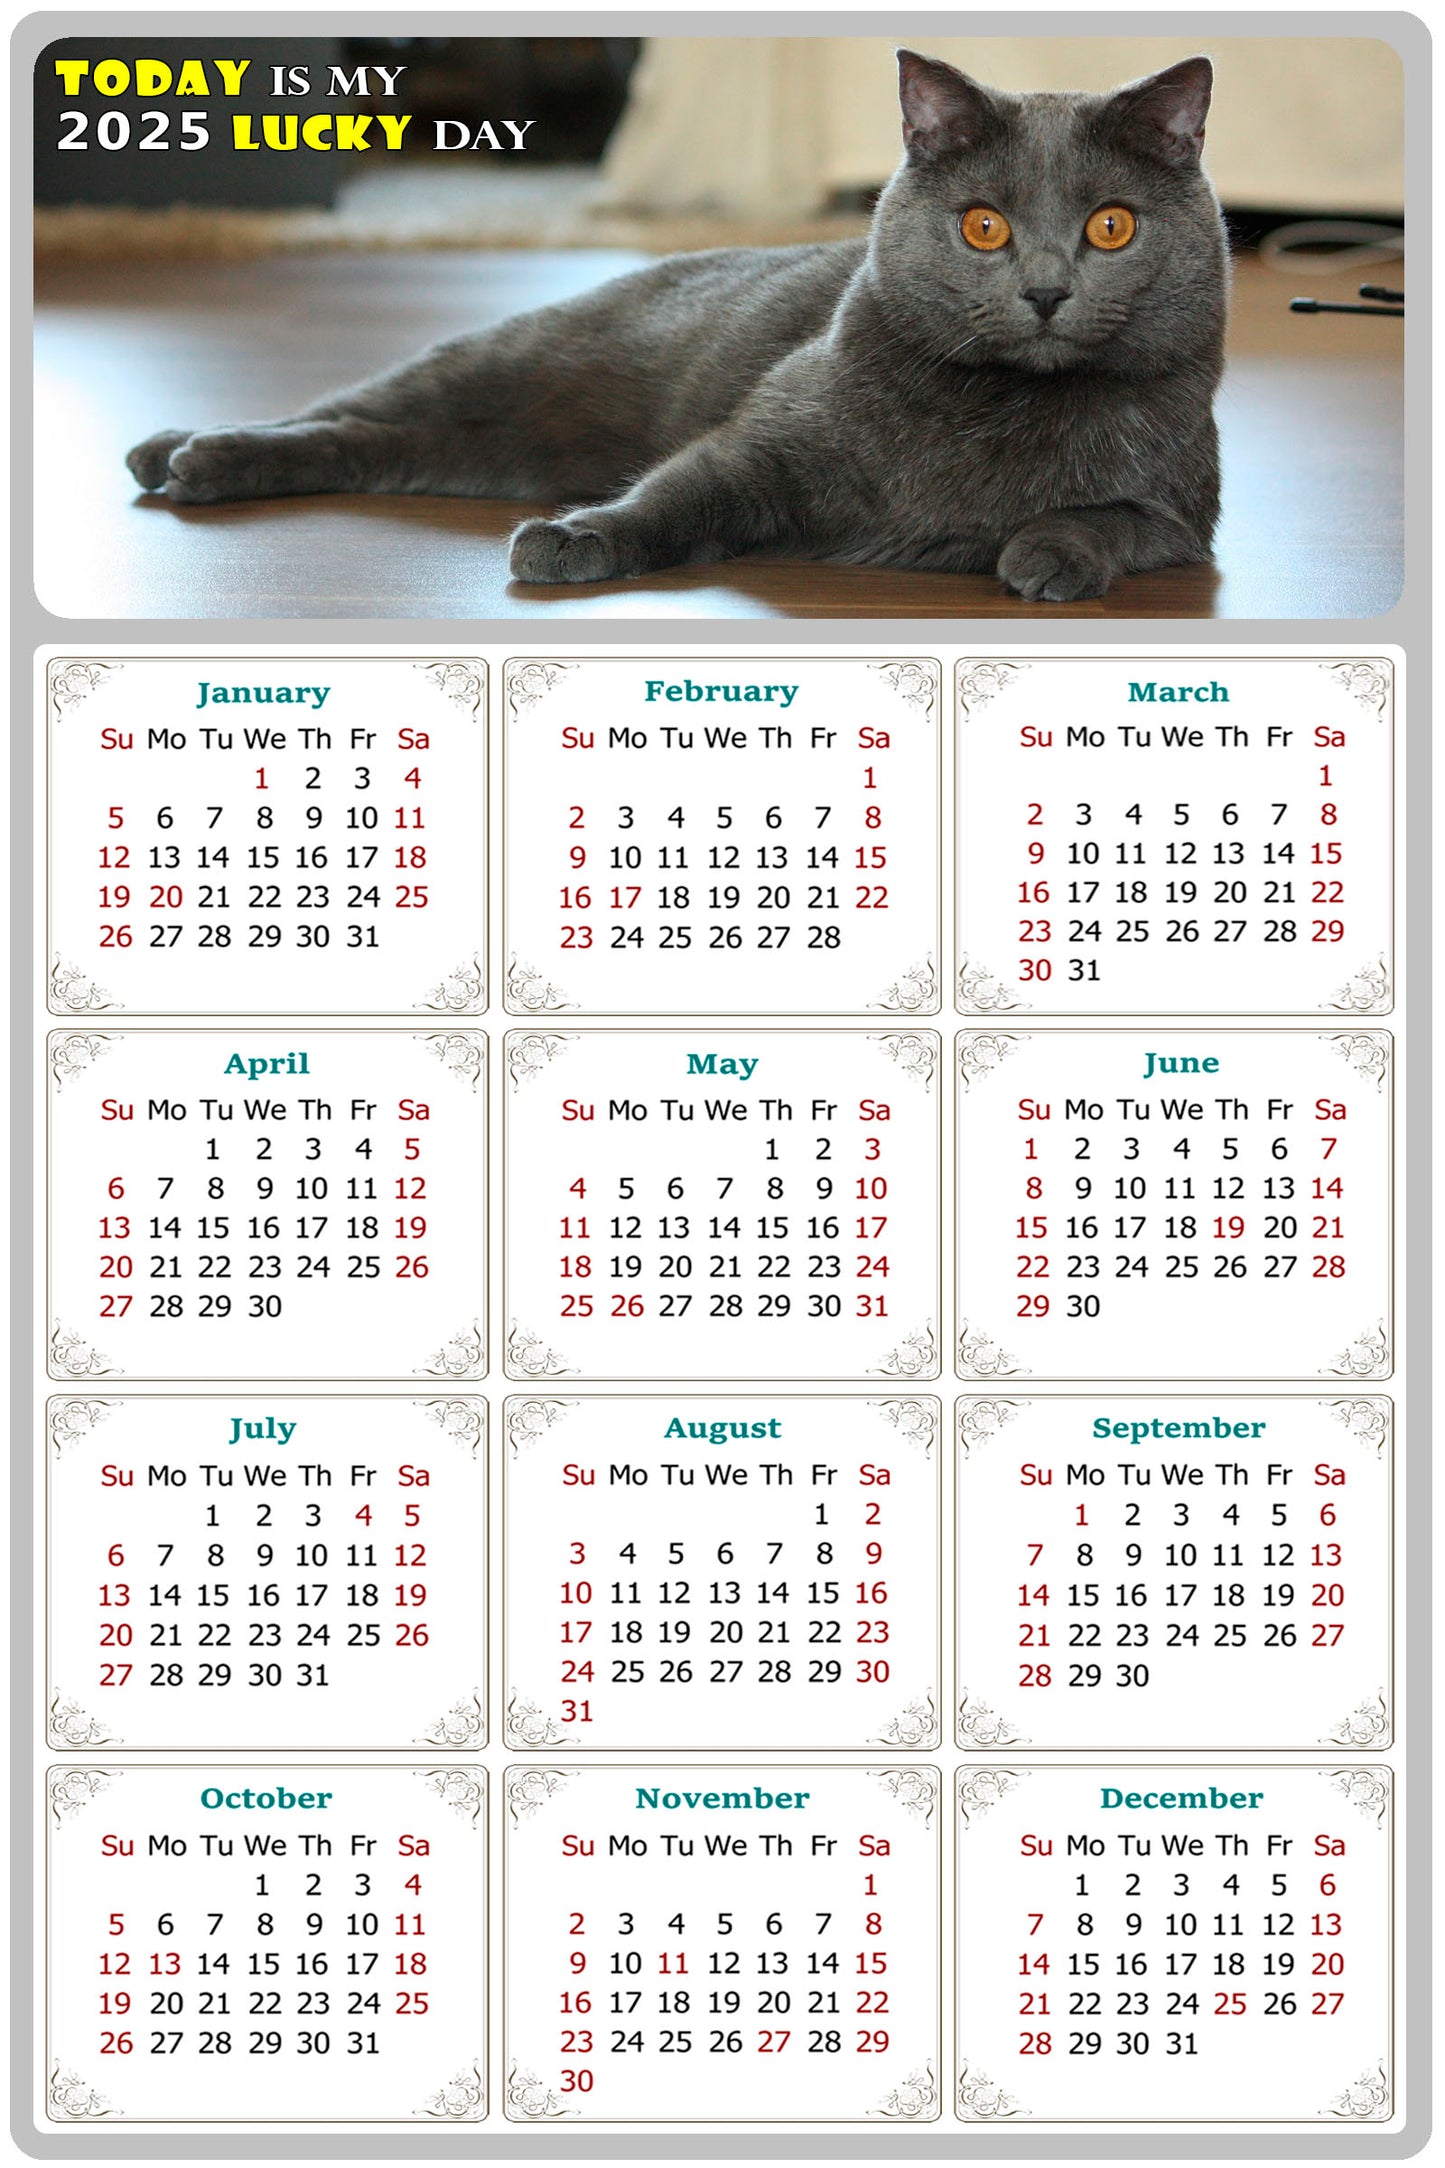 2025 Magnetic Calendar - Today is My Lucky Day (Fade, Tear, and Water Resistant)- Cat Themed 014